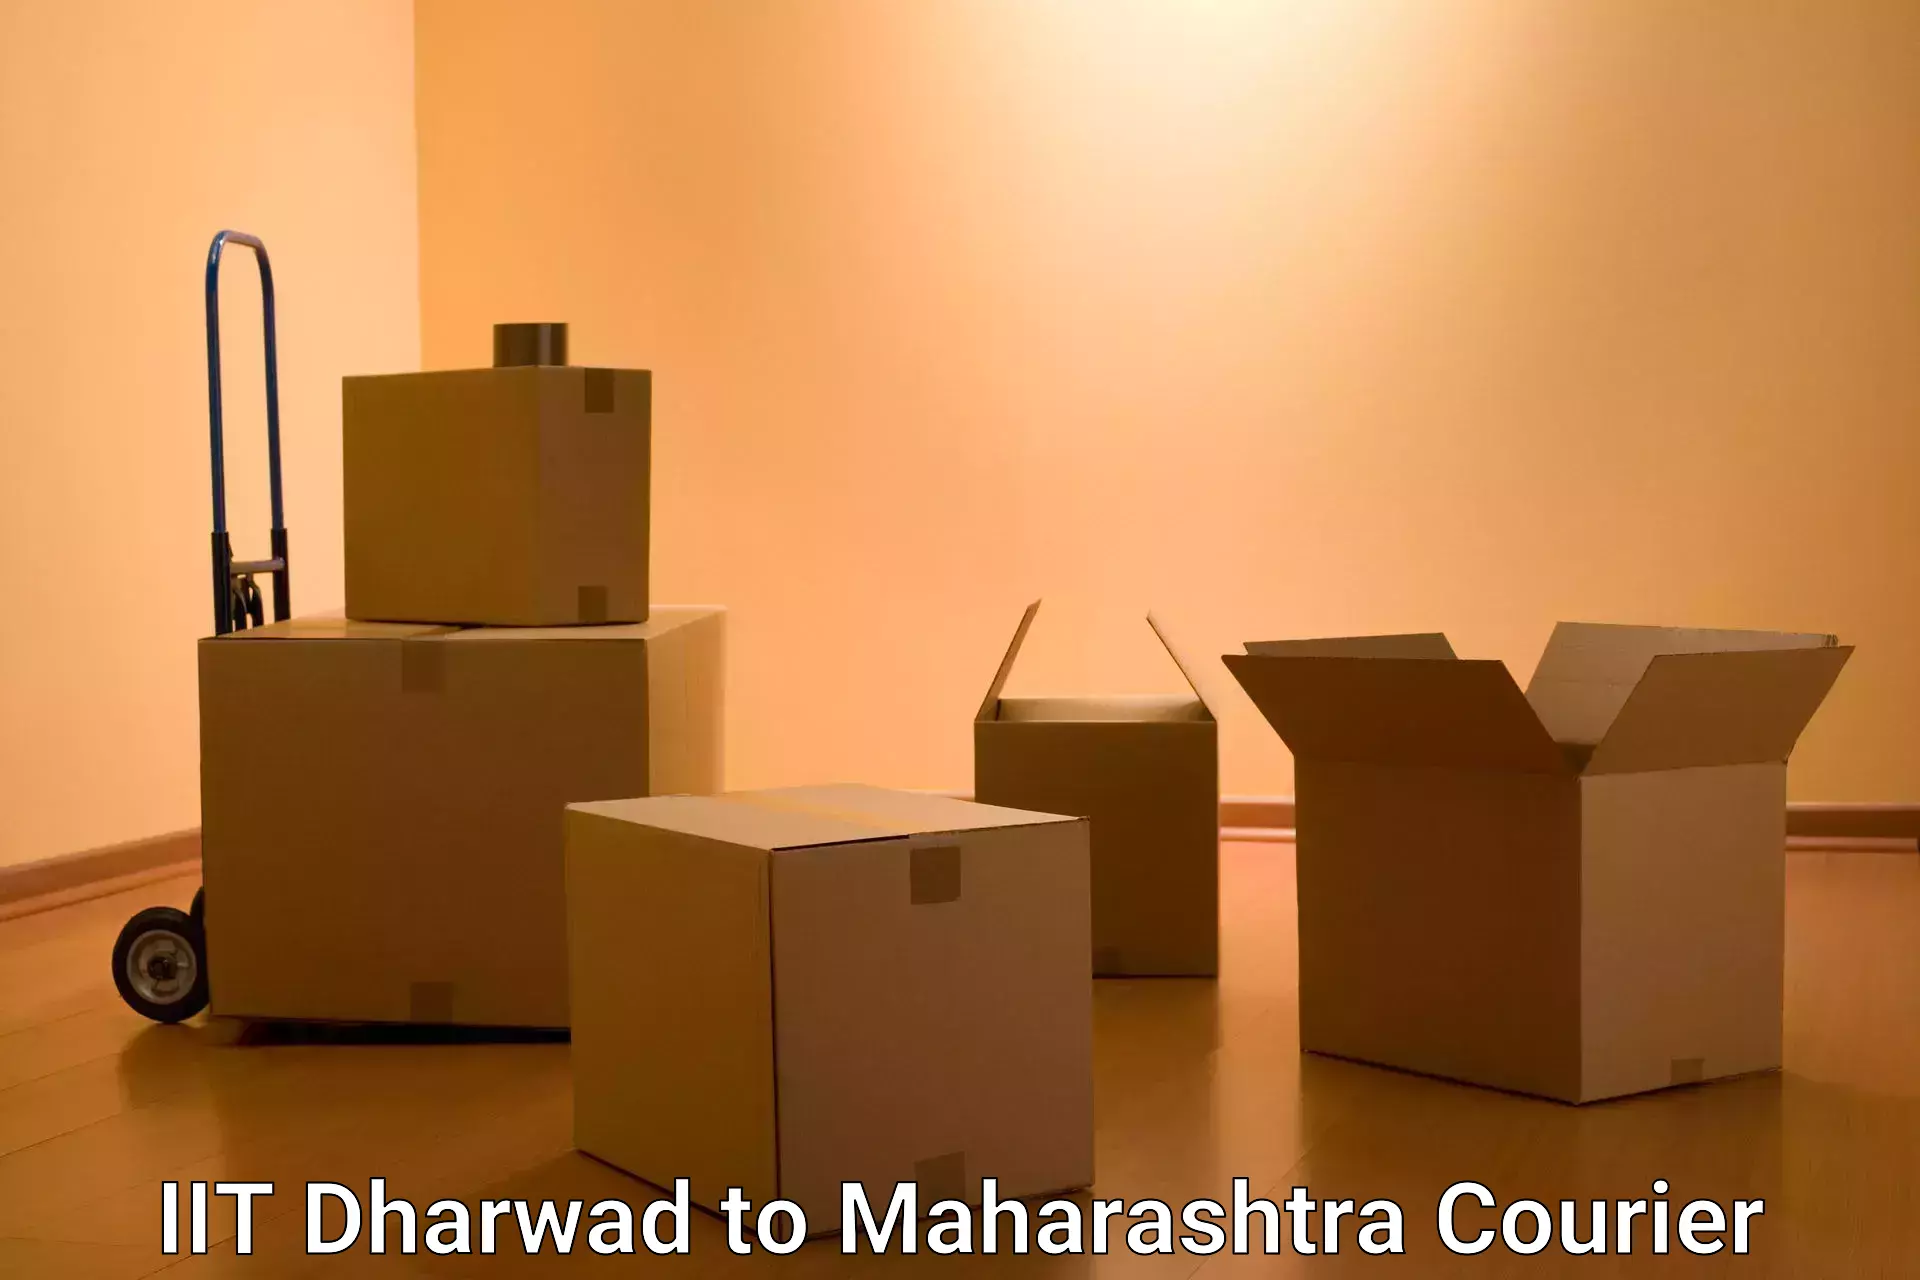 Efficient freight service in IIT Dharwad to Pune